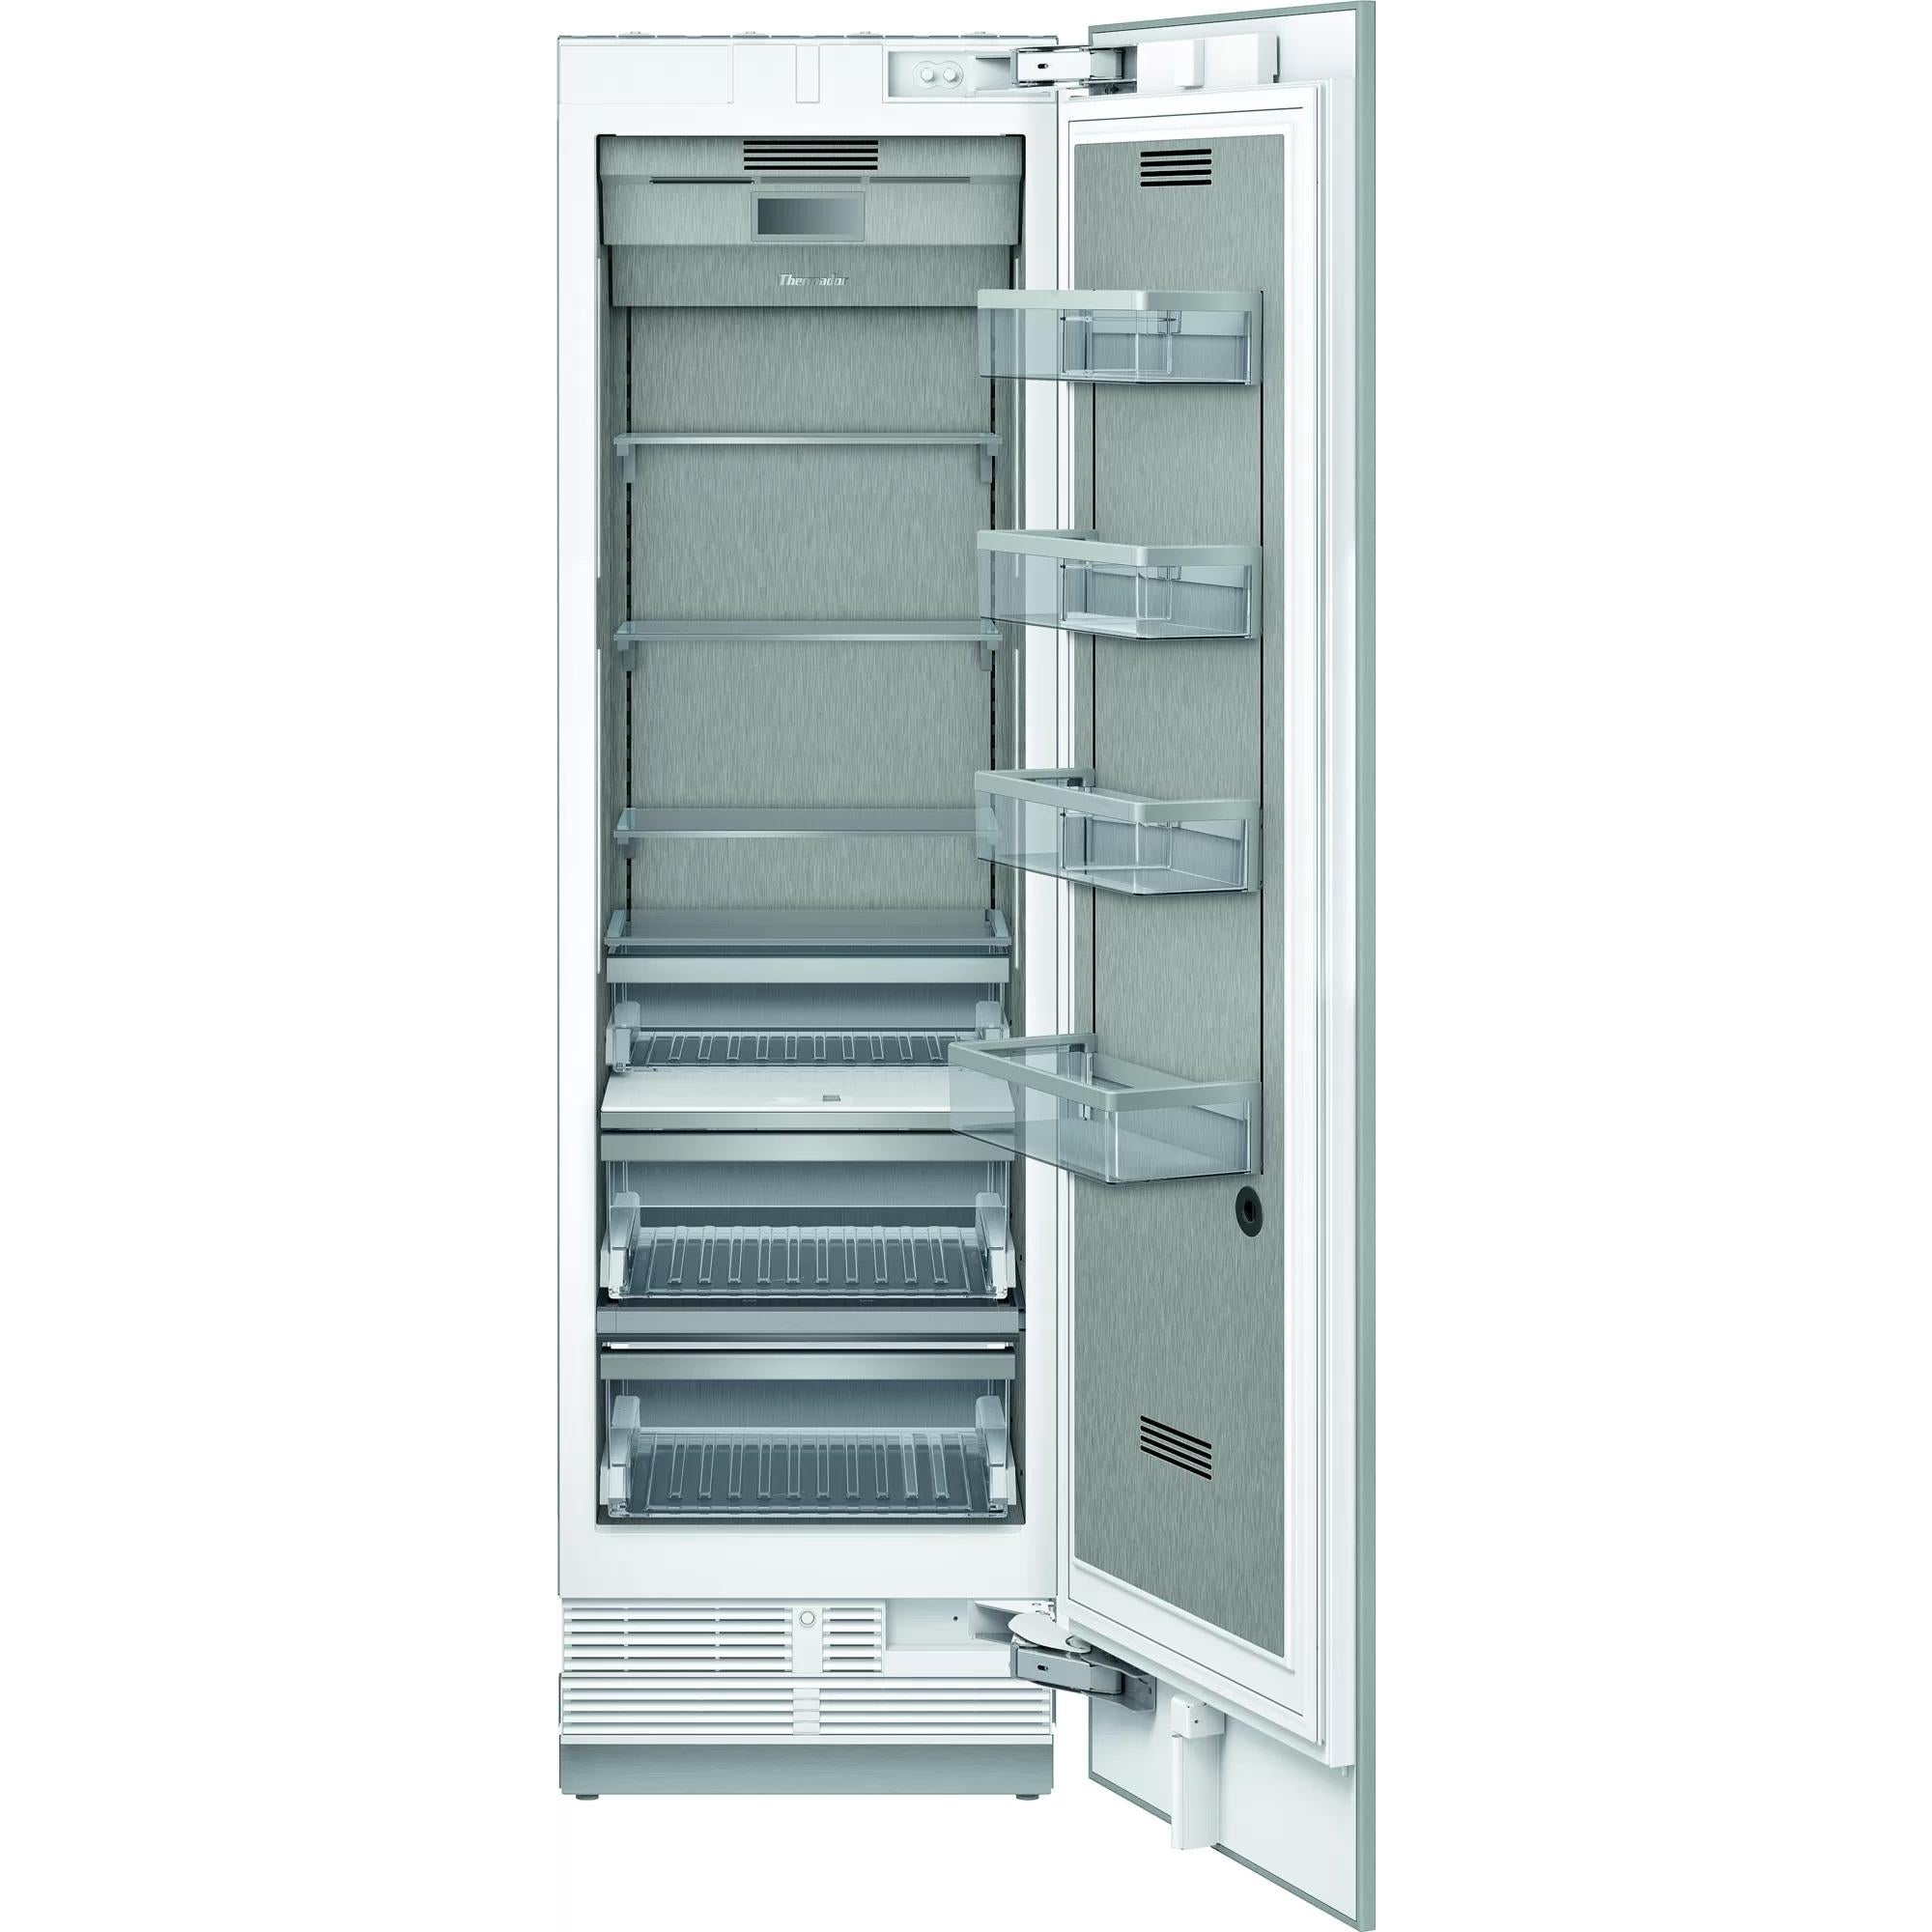 Thermador 23.5-inch, 13 cu.ft. Built-in All Refrigerator with SoftClose? Drawers T23IR905SP